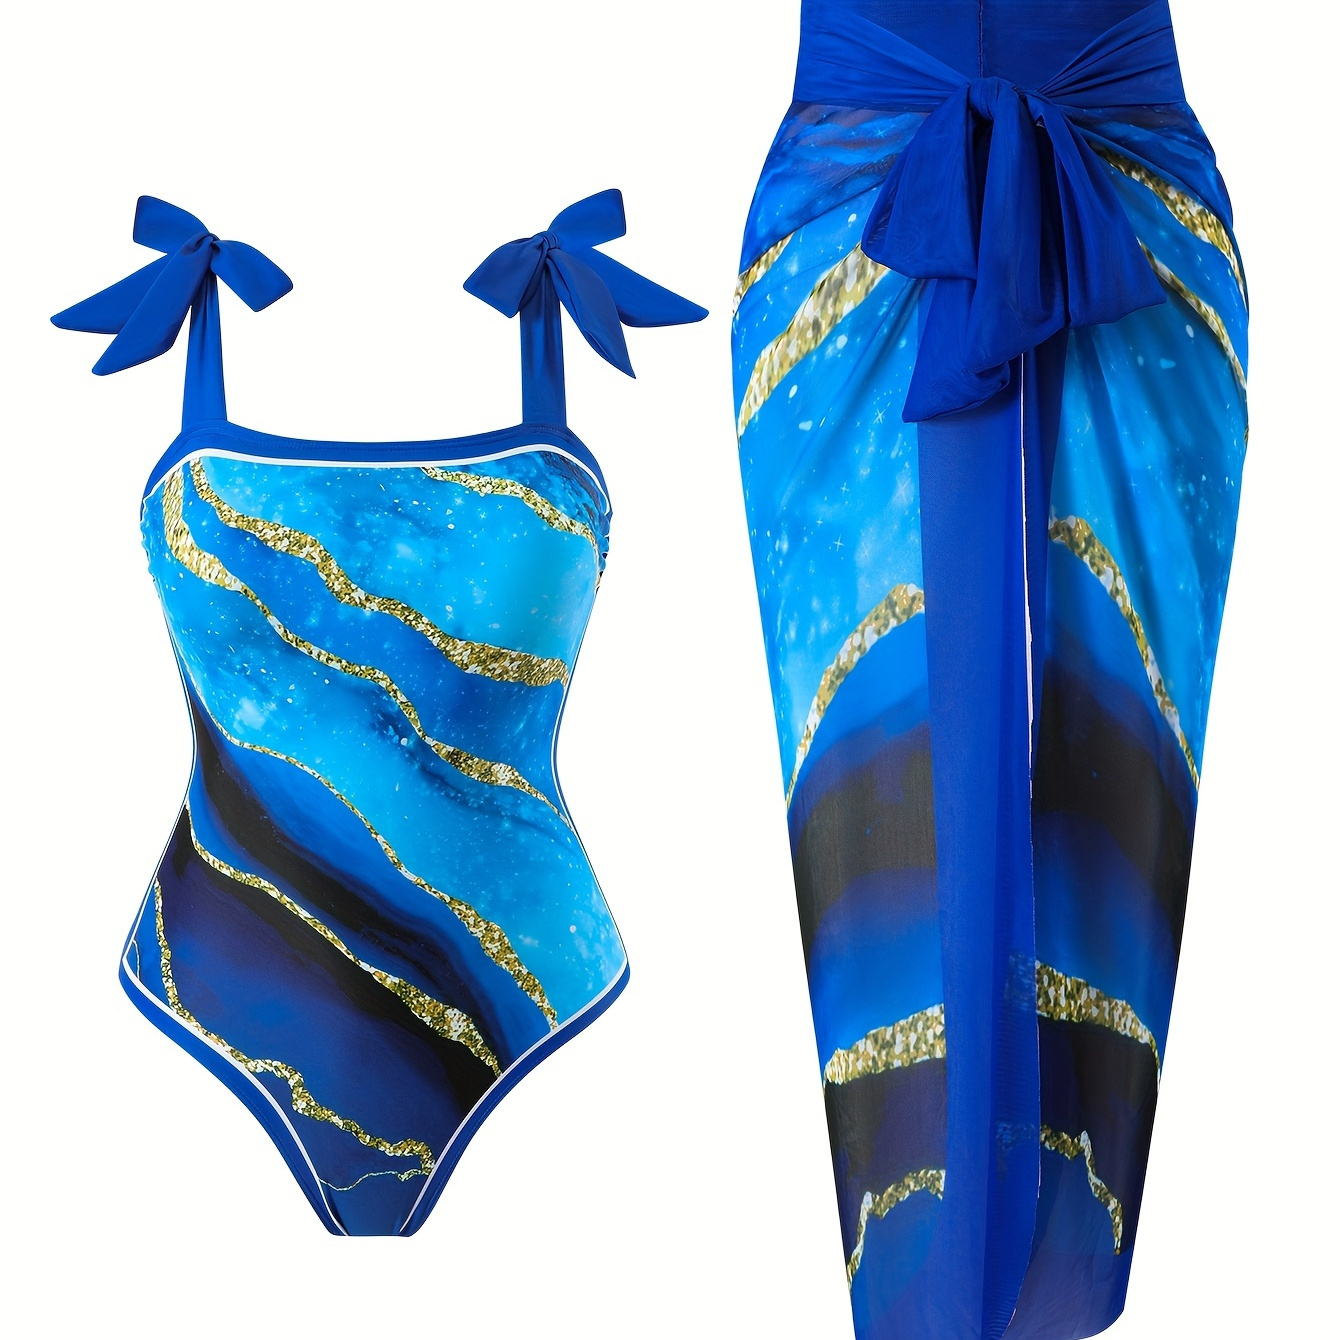 

Women's Plus Size One-piece Swimsuit With Skirt, Conservative Style, Blue & Golden Marble Pattern, Beachwear With Bow Tie Shoulders, Comfort Fit